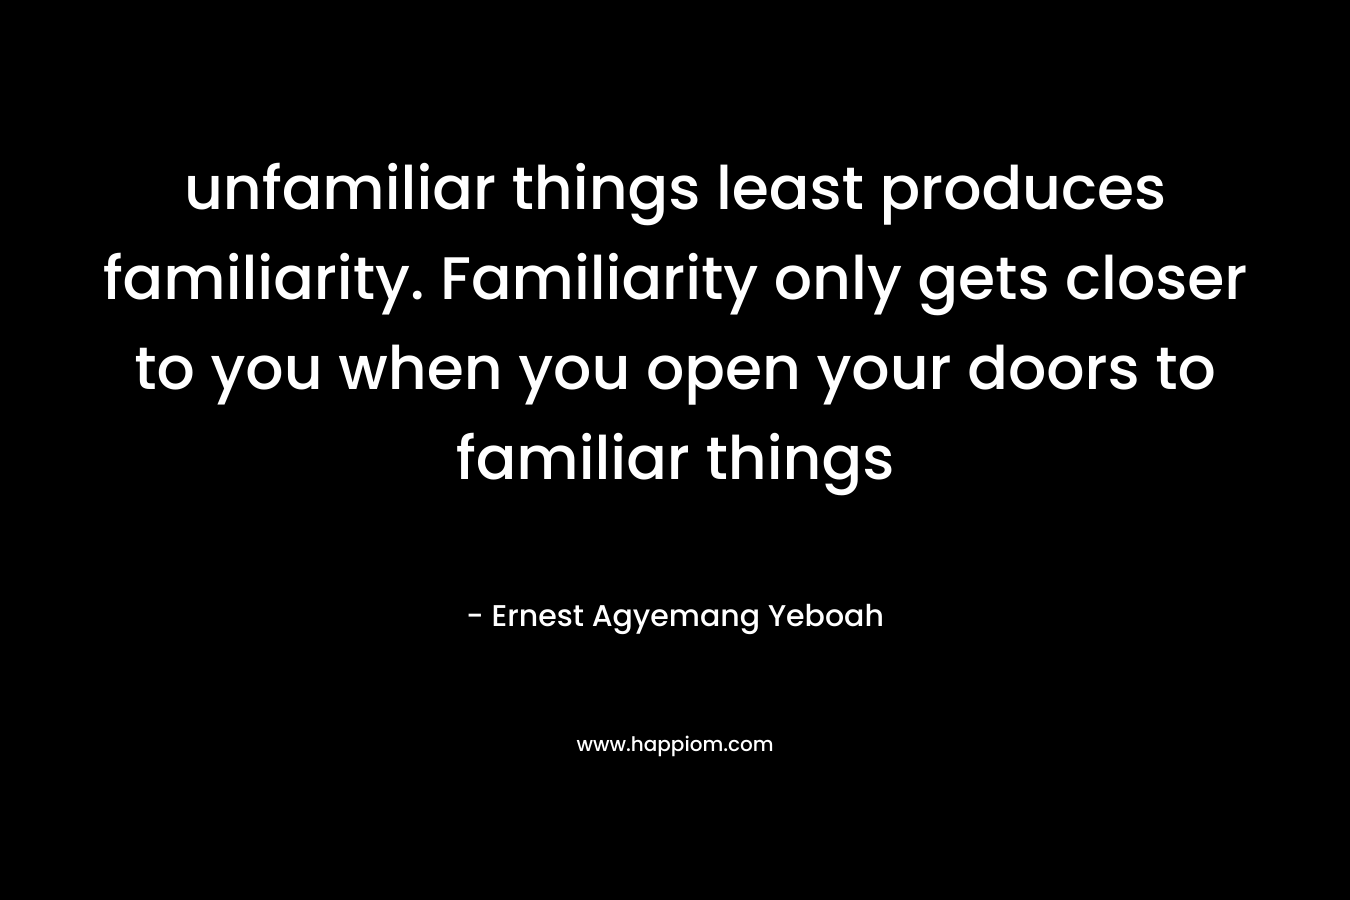 unfamiliar things least produces familiarity. Familiarity only gets closer to you when you open your doors to familiar things